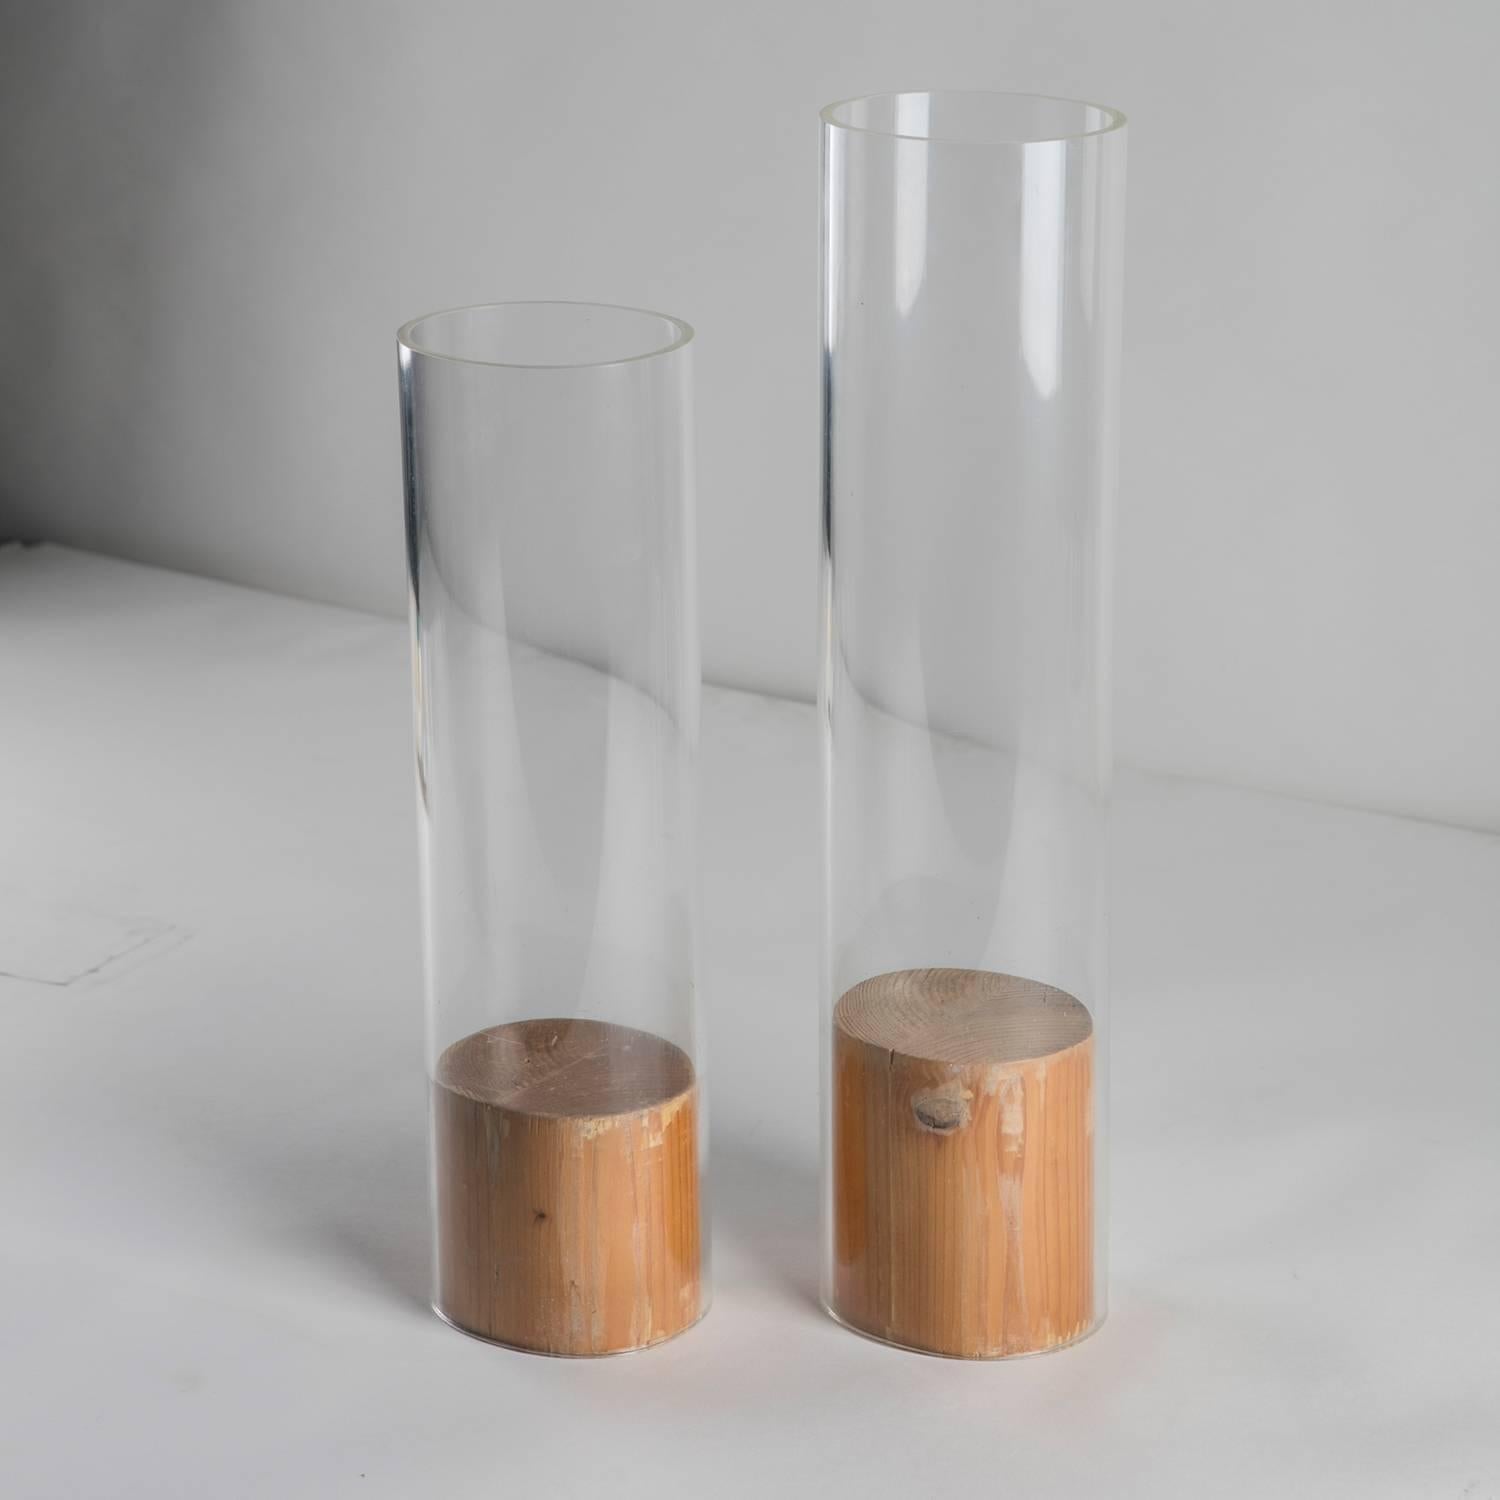 Remarkable set of two vases by Carla Venosta.
These prototypes pieces are built connecting a solid wood block and a plexiglass tube.
Size refers to the tallest model.
     